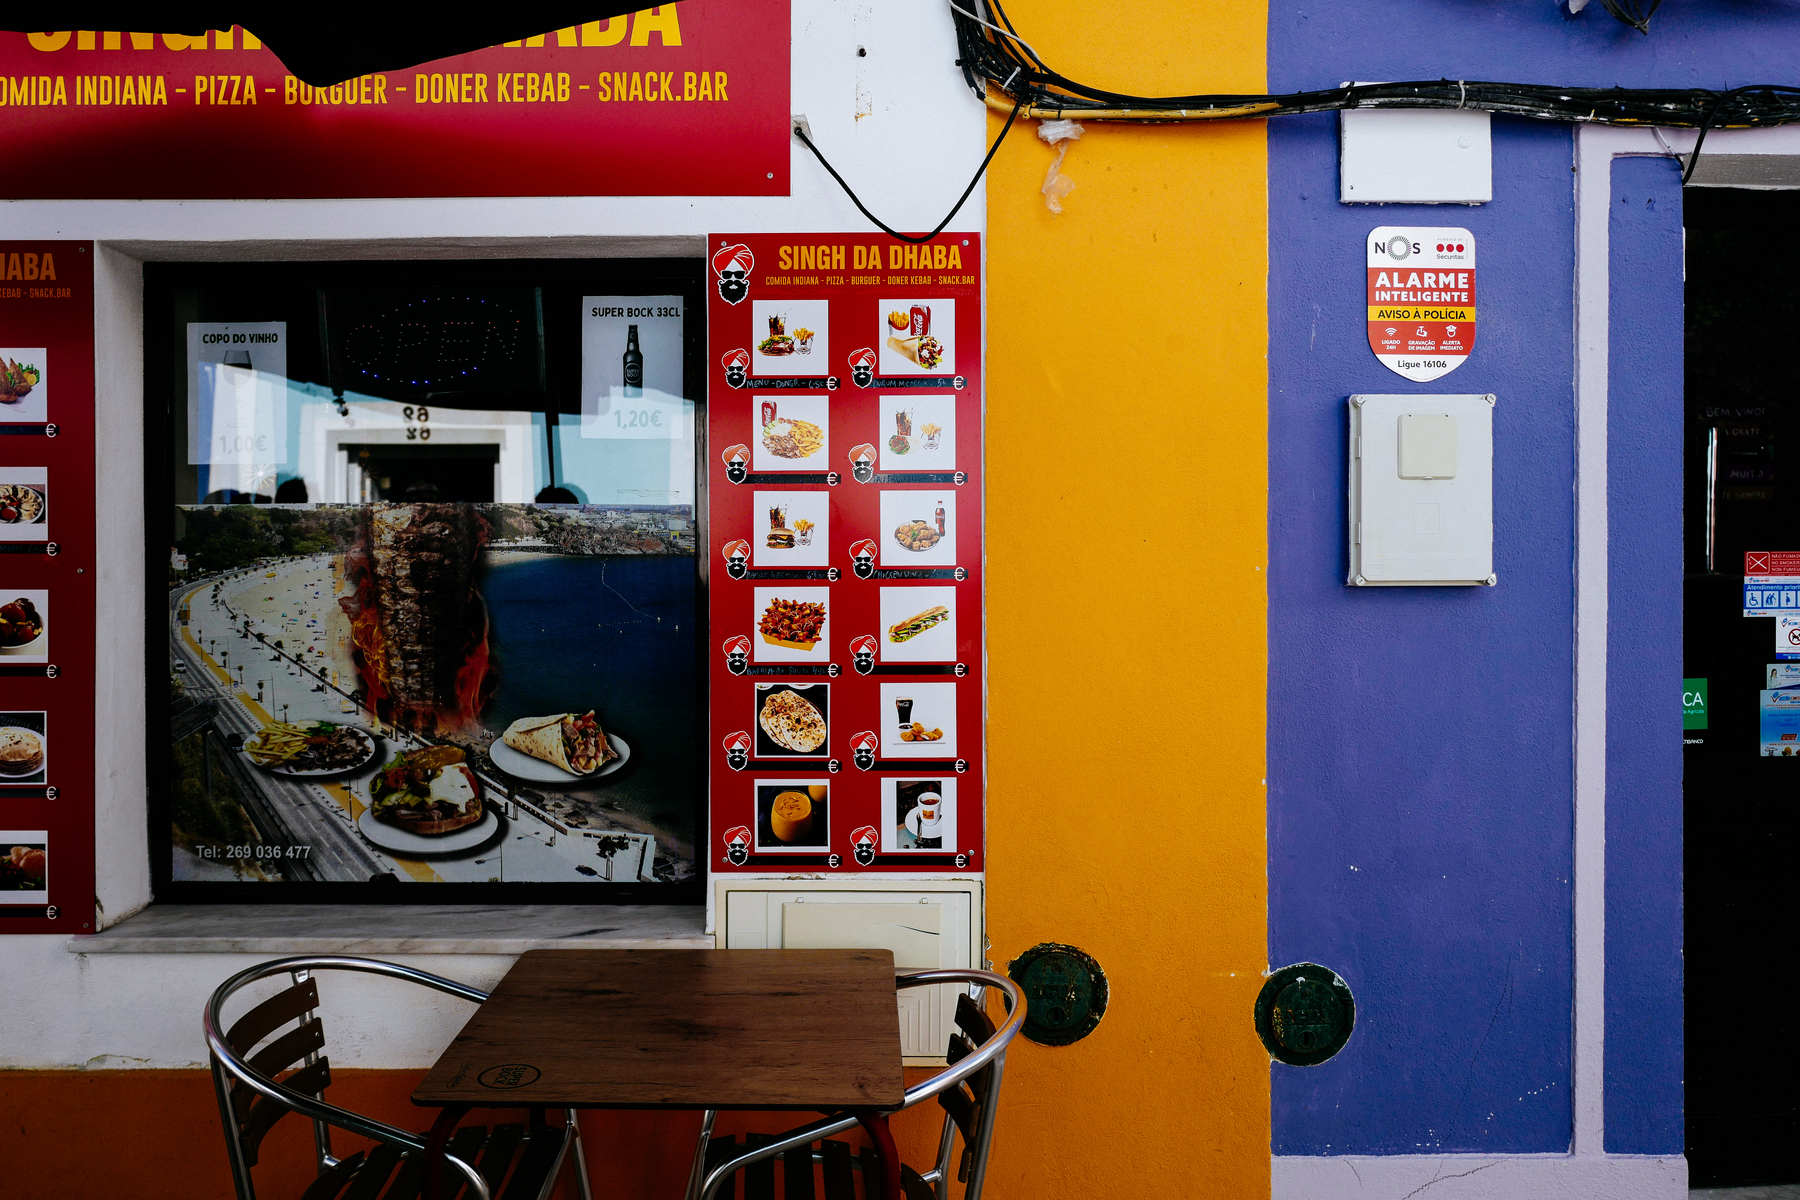 A colorful street view of a restaurant exterior with a red sign that reads &ldquo;COMIDA INDIANA - PIZZA - BURGUER - DONER KEBAB - SNACK.BAR.&rdquo; A photo menu is displayed beside the entrance,